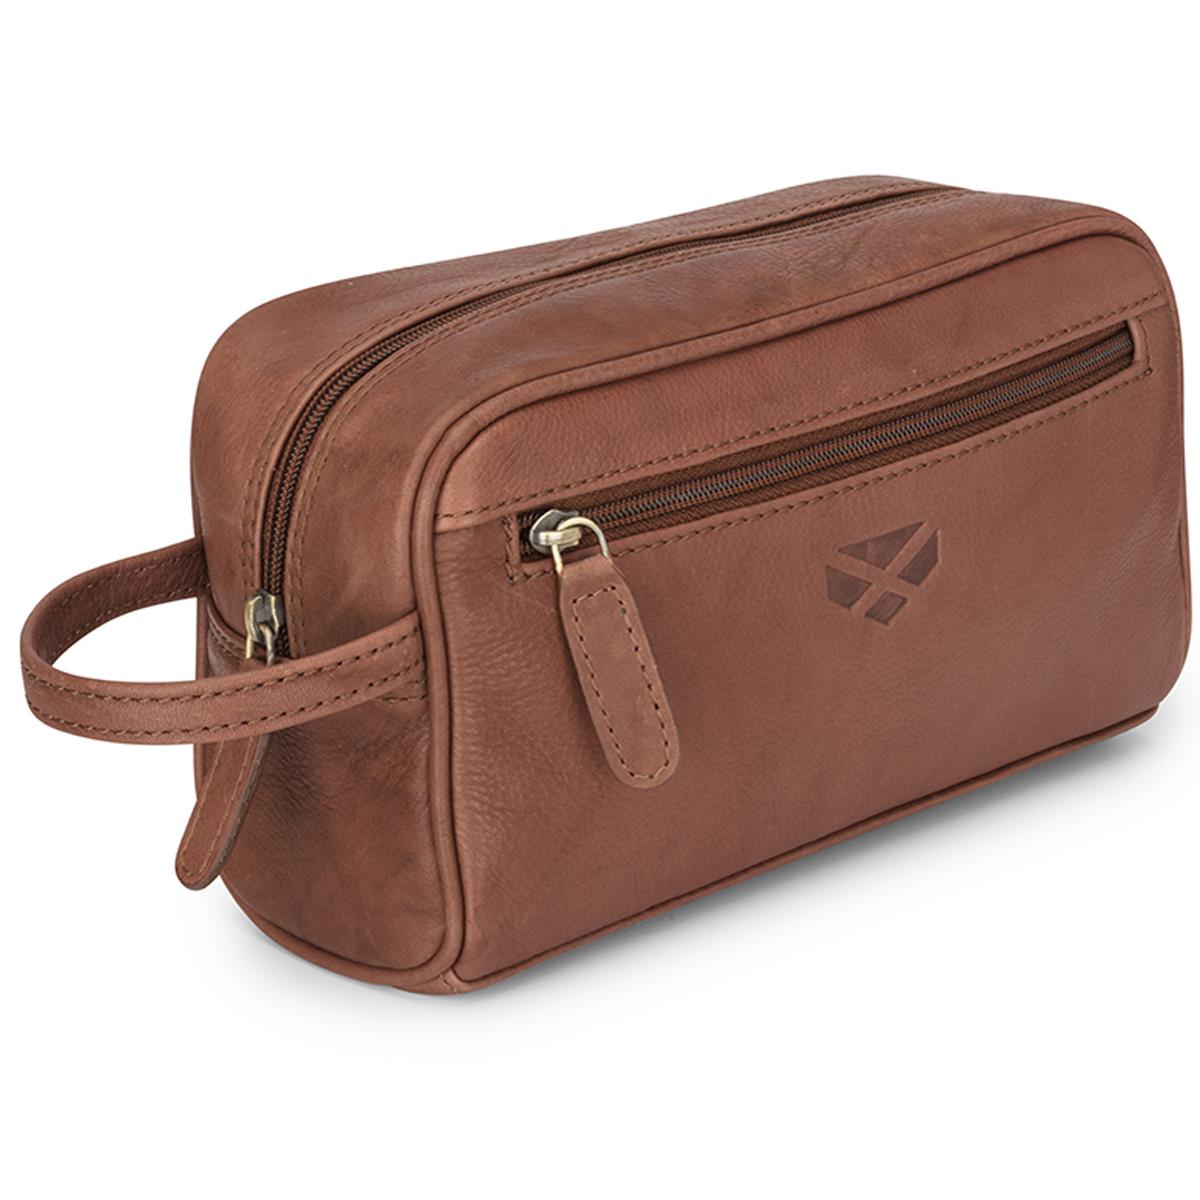 What's the overall size of the Monarch wash bag and does it have an inside pocket?